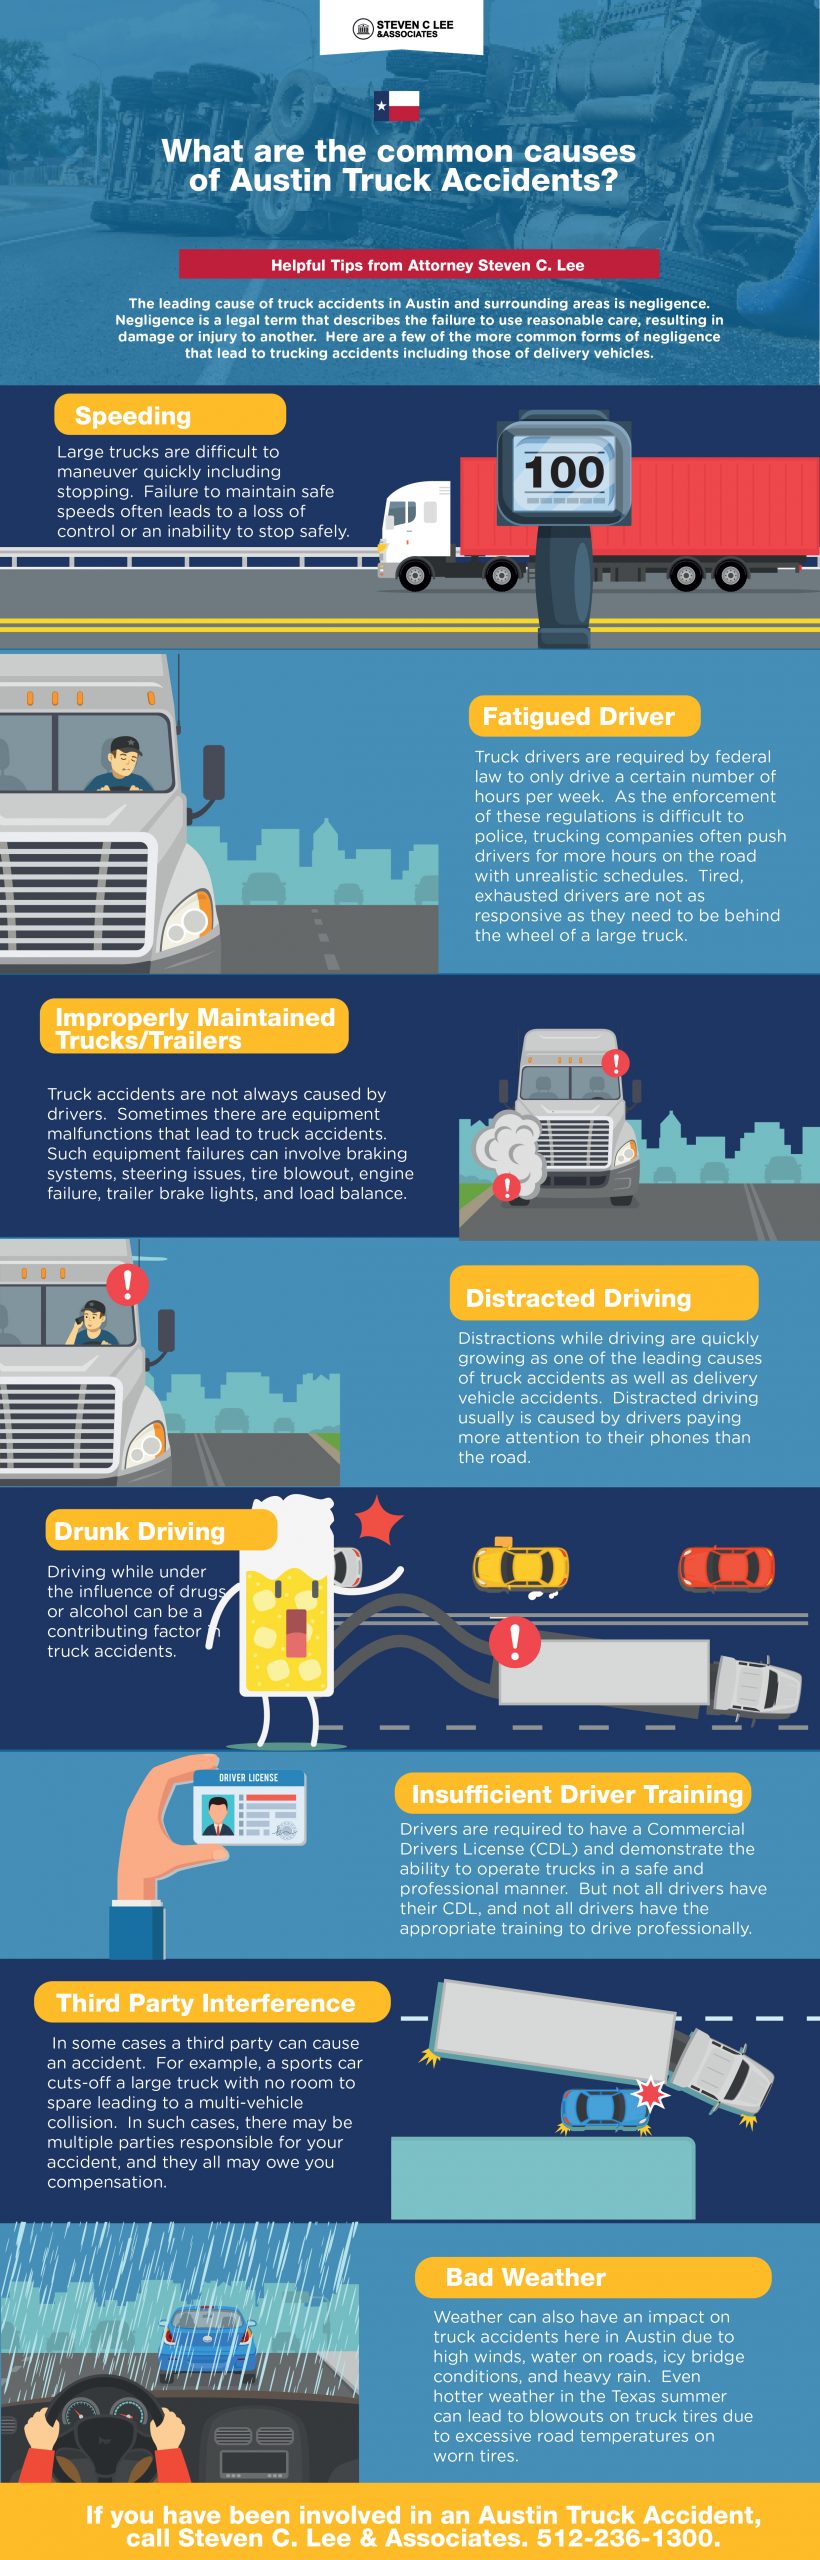 Infographic Austin Truck Accident Causes